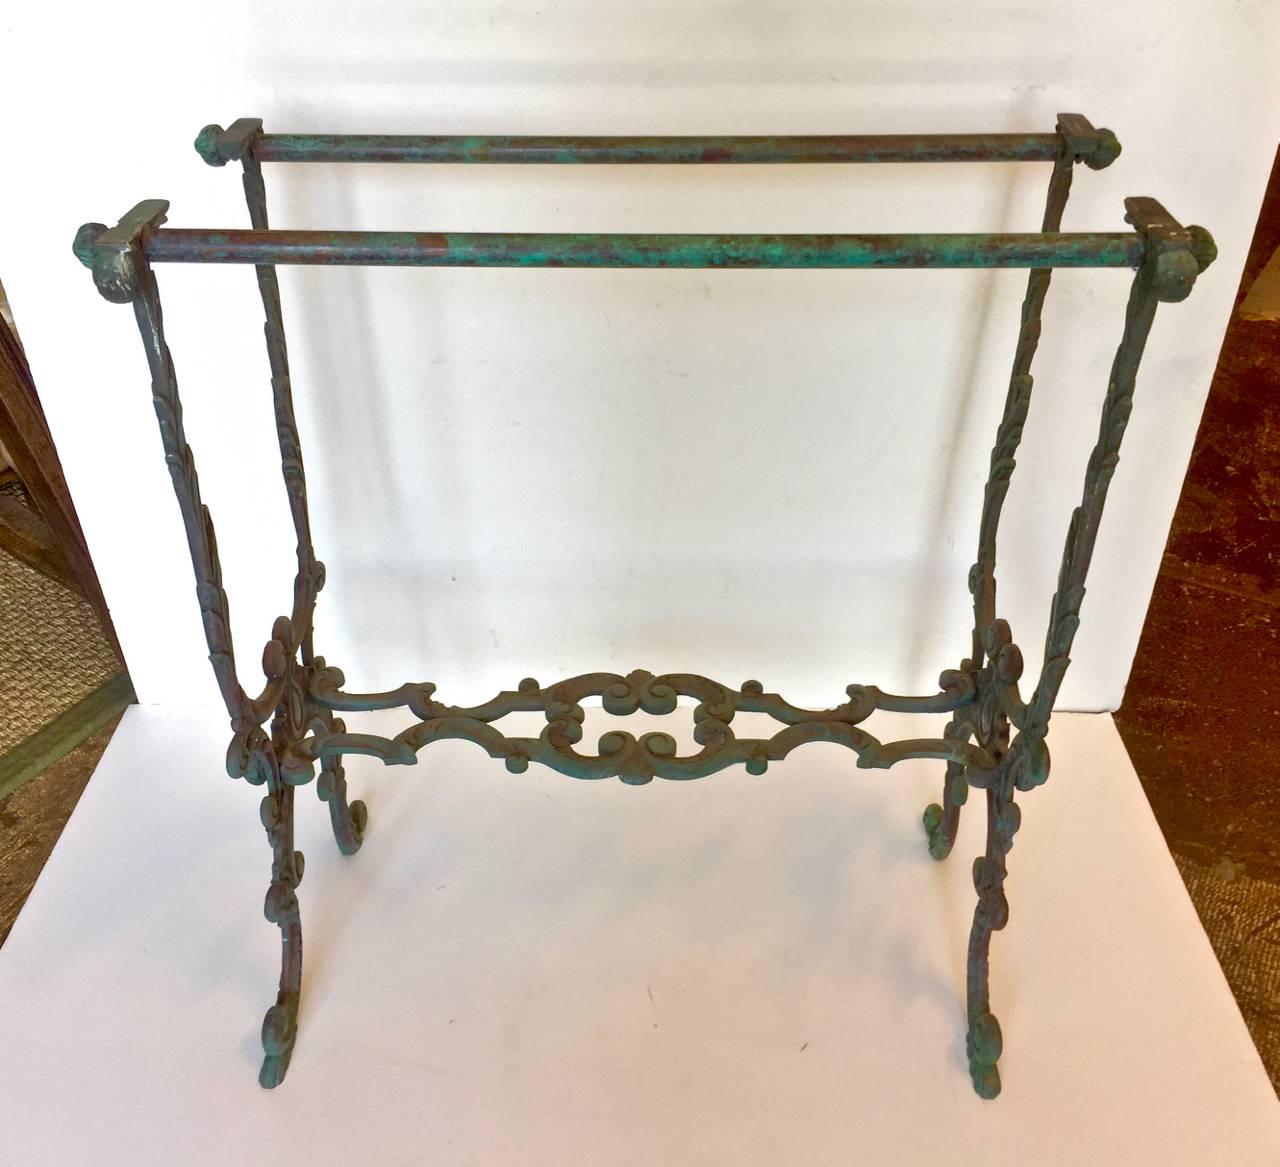 This is an unusual pair of French Bronze console table bases that date to circa 1870. The console are in a Louis XV-style and feature cast acanthus leaves and other foliage, snail form feet and beautiful finials. The cast bronze retains its original